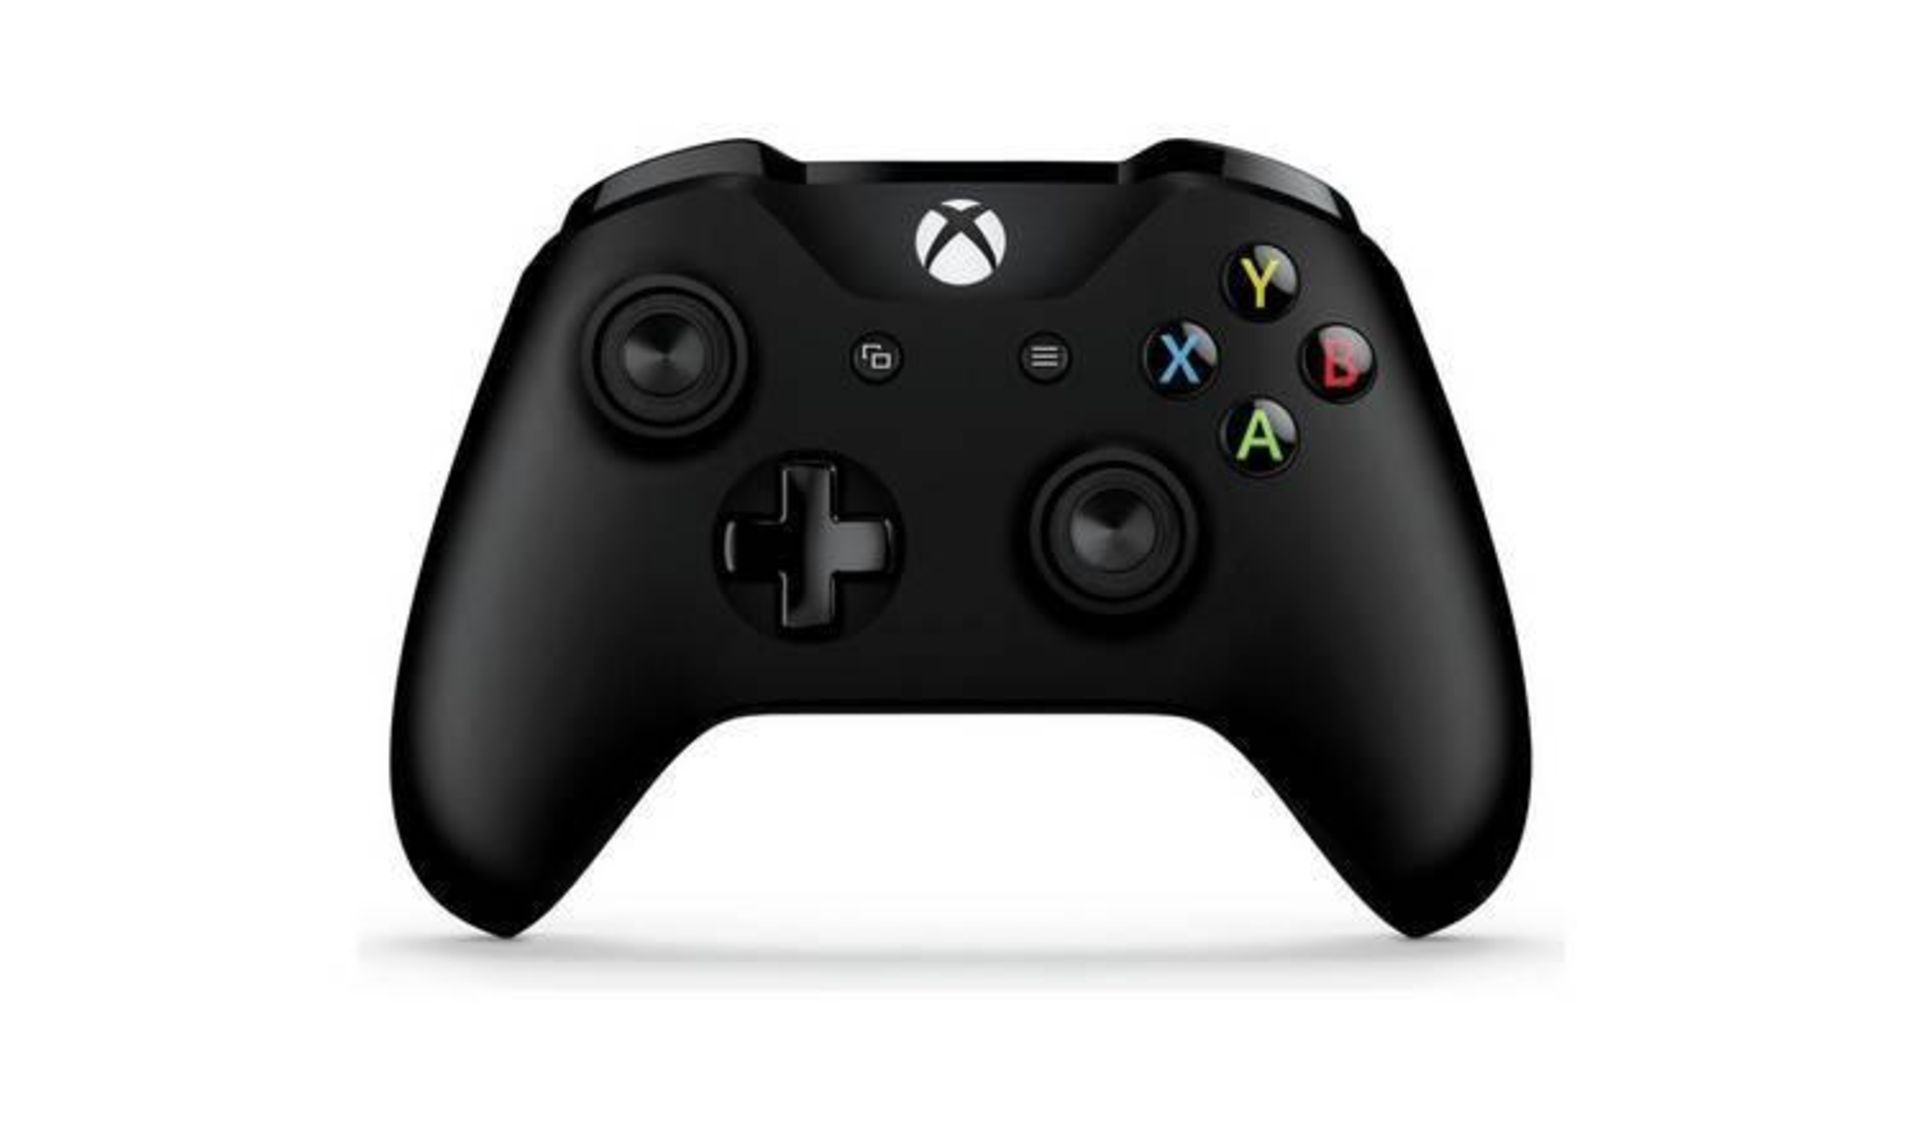 Official Xbox One Wireless Controller 3.5mm - Black - £44.99 RRP